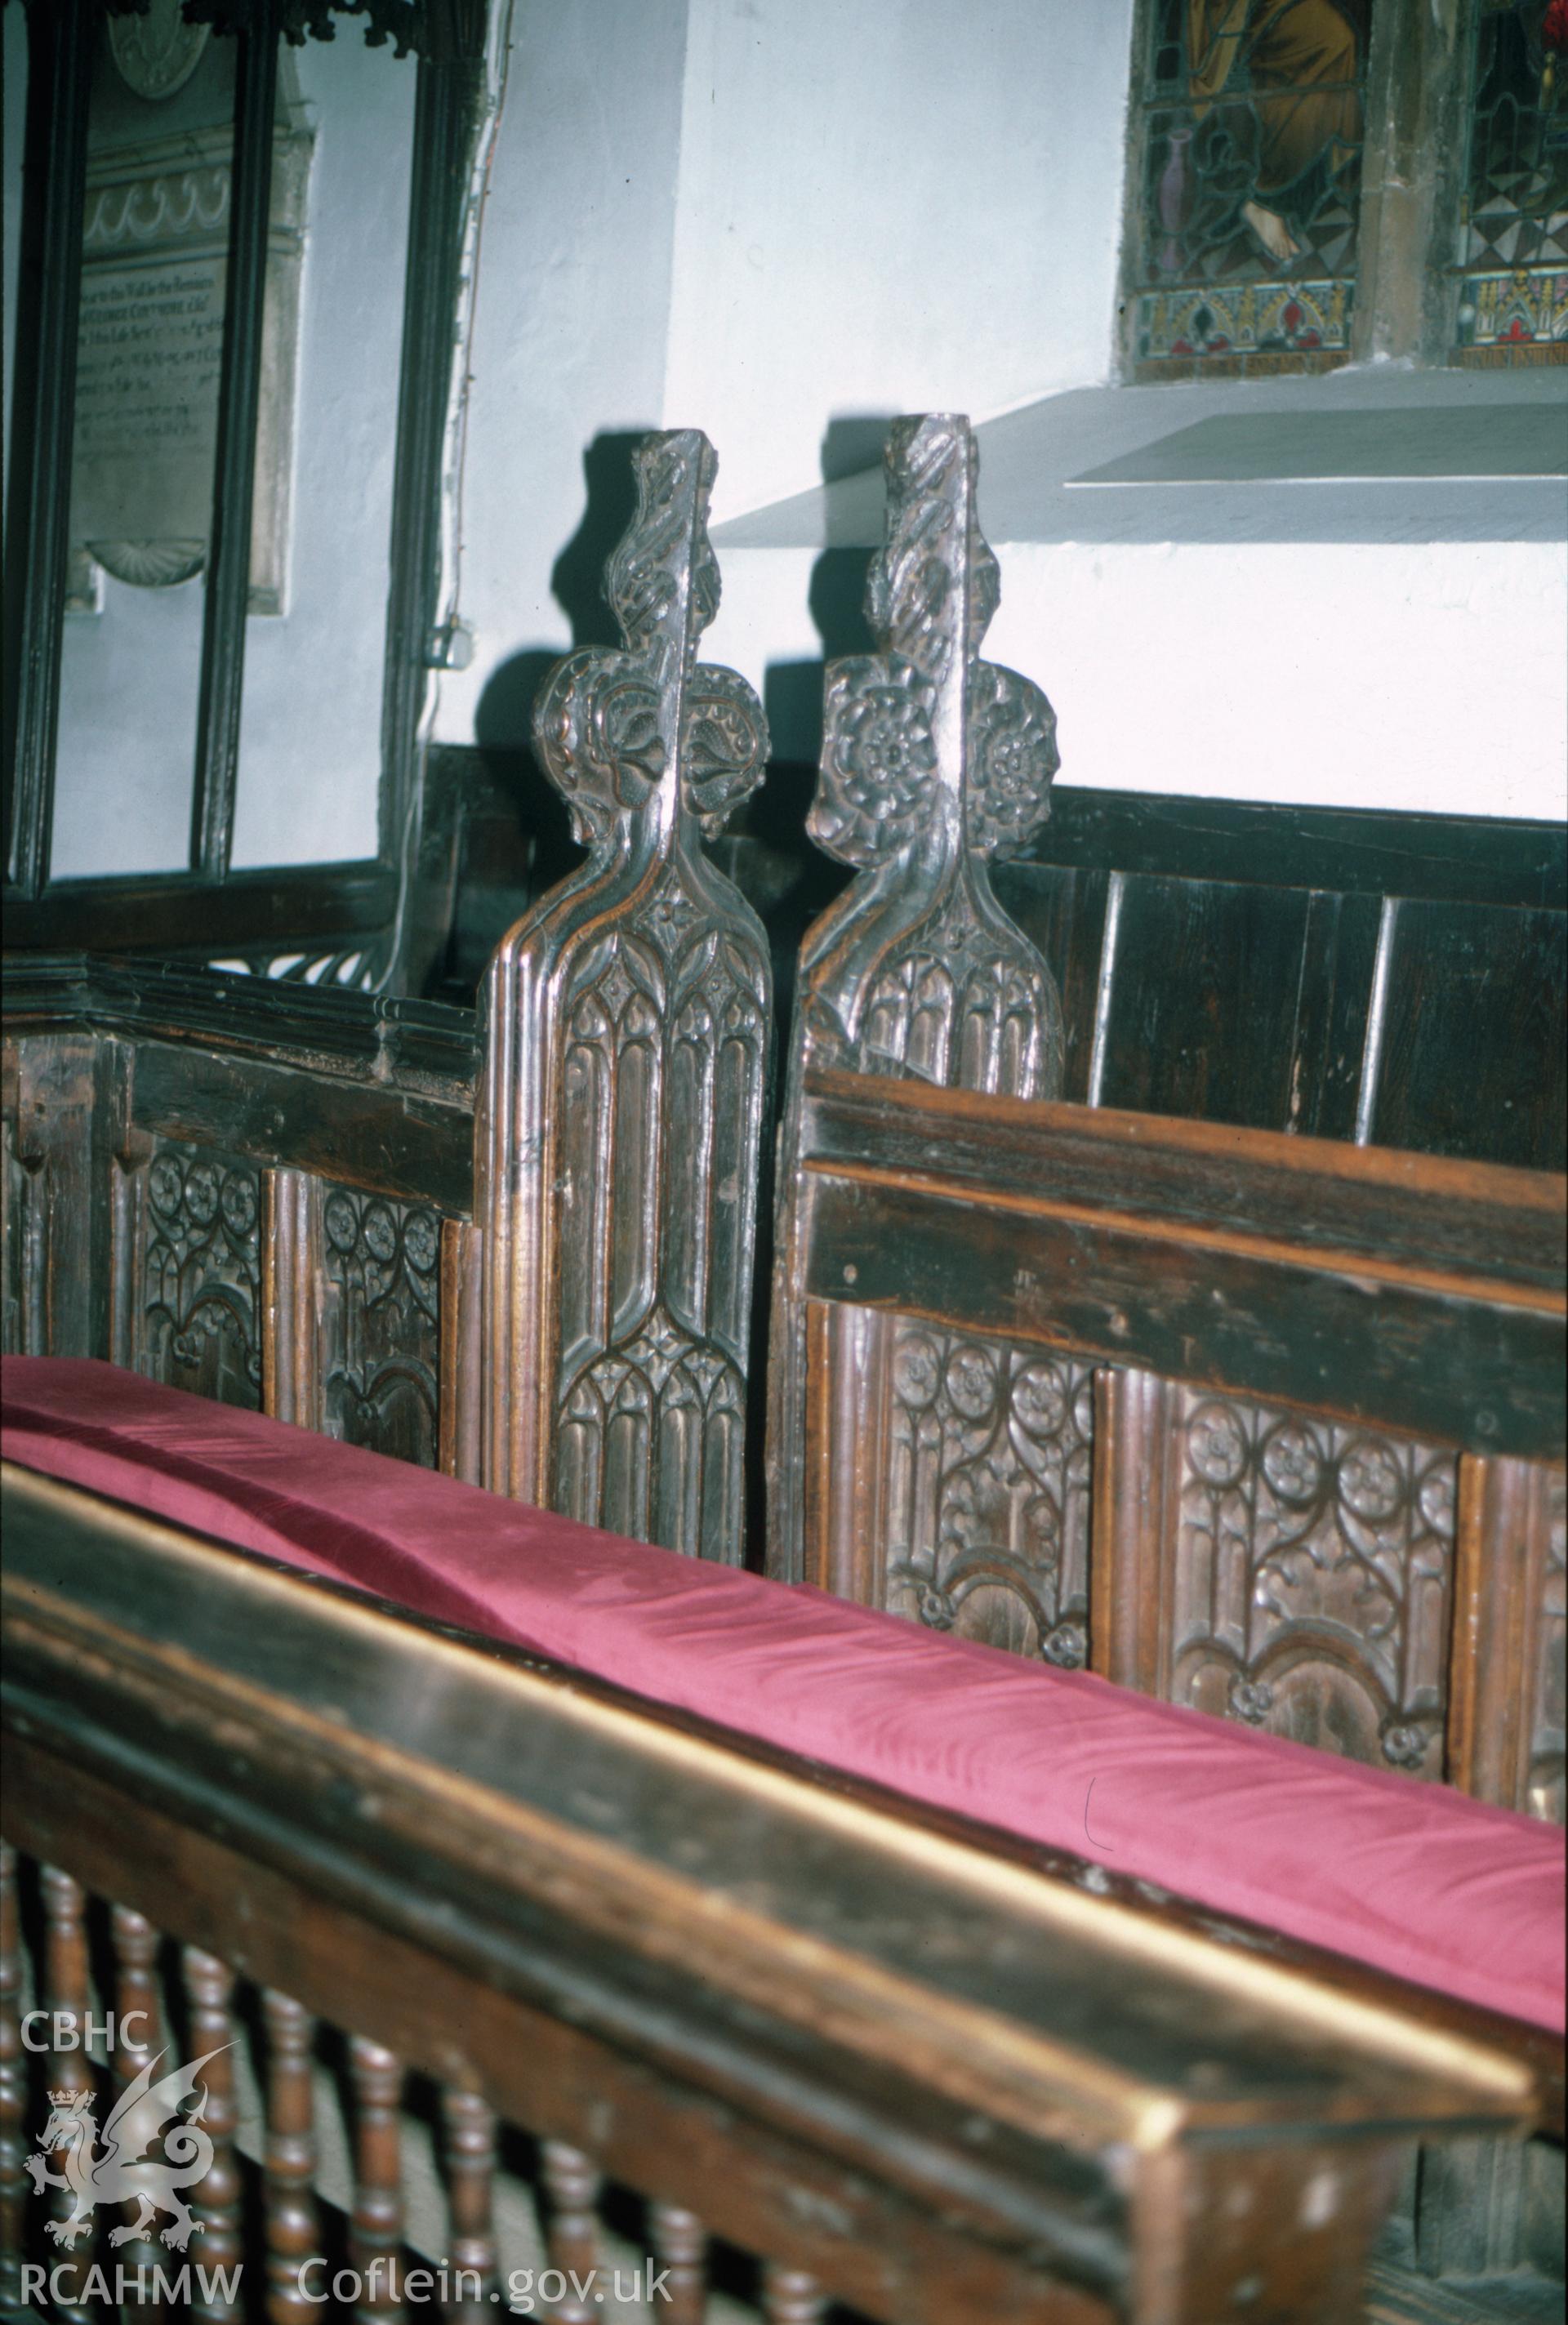 Colour slide showing pews in Conwy Church.